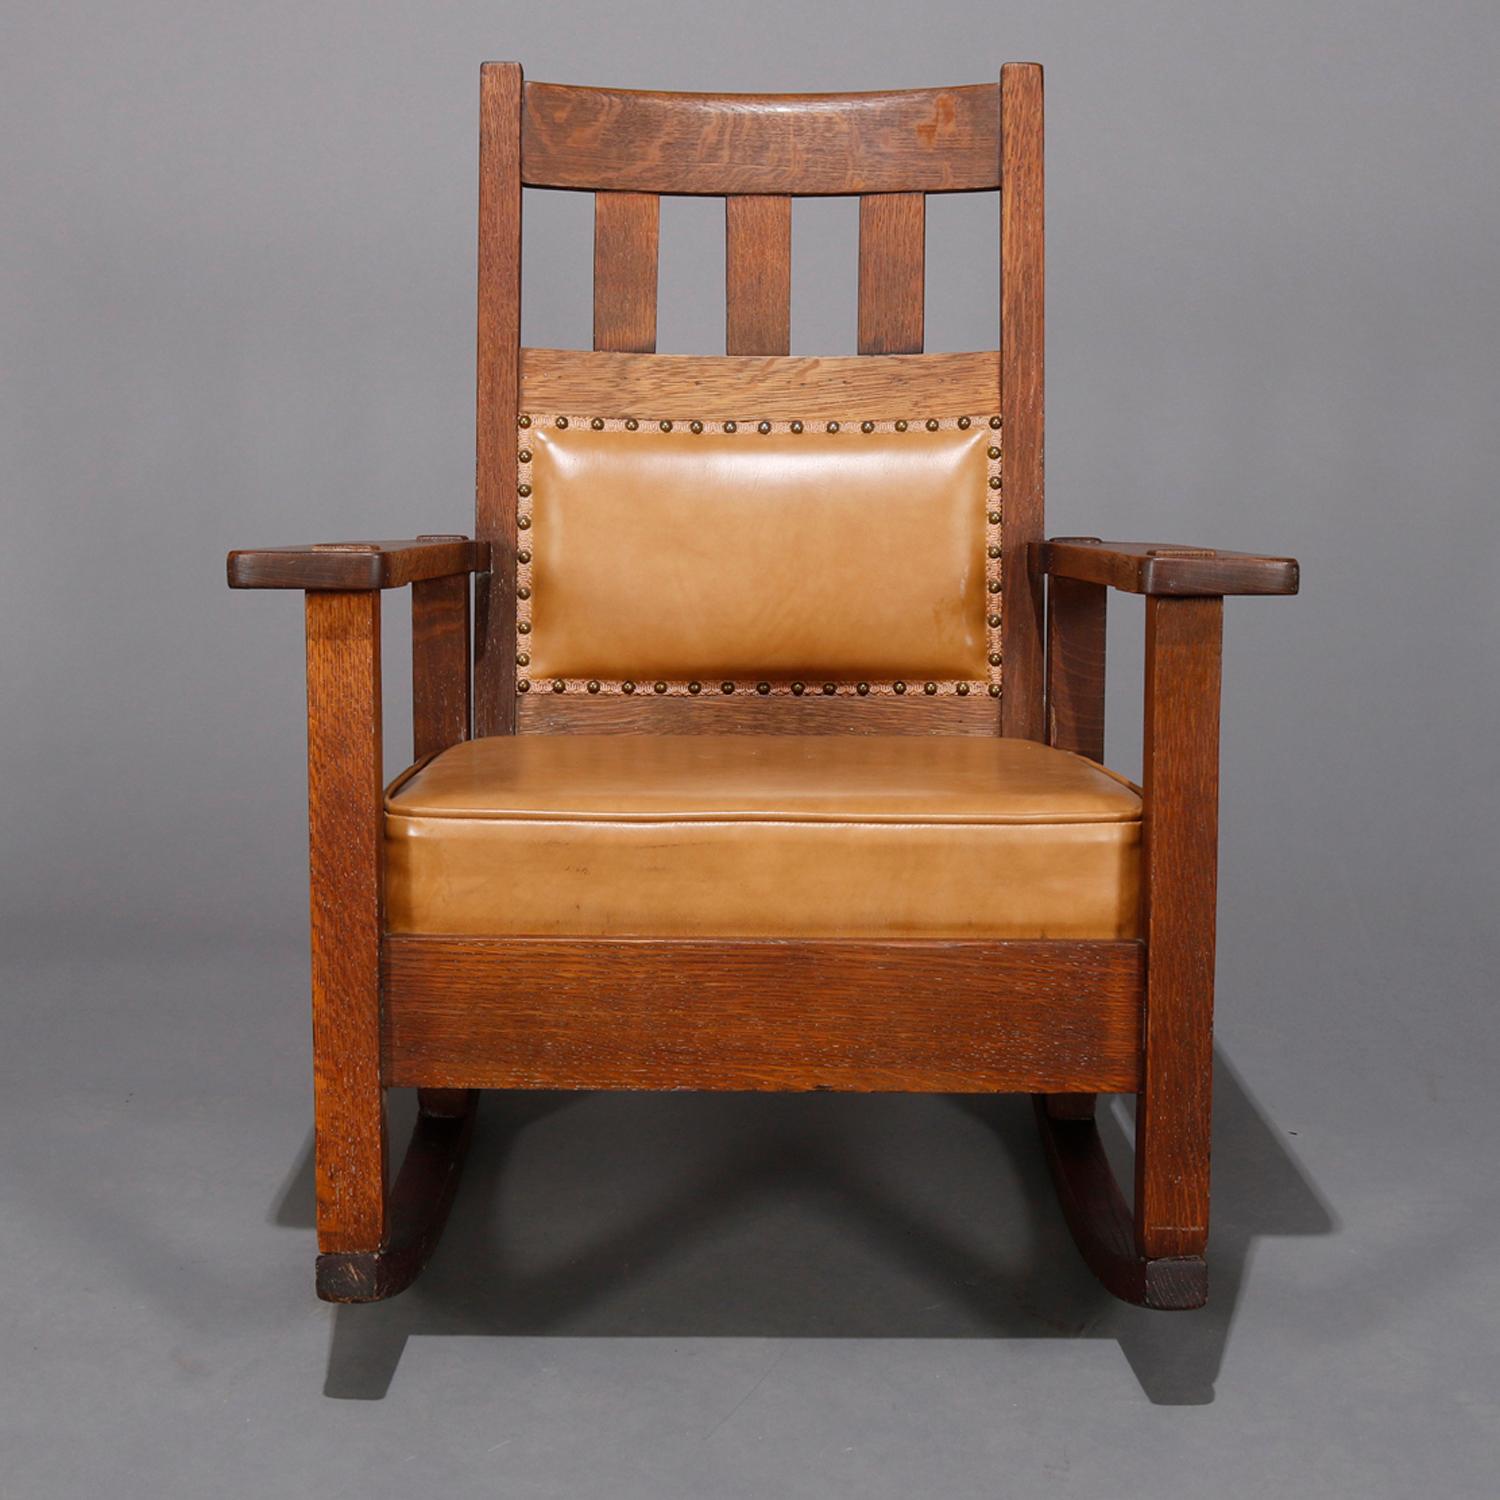 An antique Arts & Crafts Mission oak rocking chair by Stickley Bros. offers quarter sawn oak construction with slat back surmounting upholstered lumbar and seat, with even arms and slat seat, circa 1900

Measures - 34